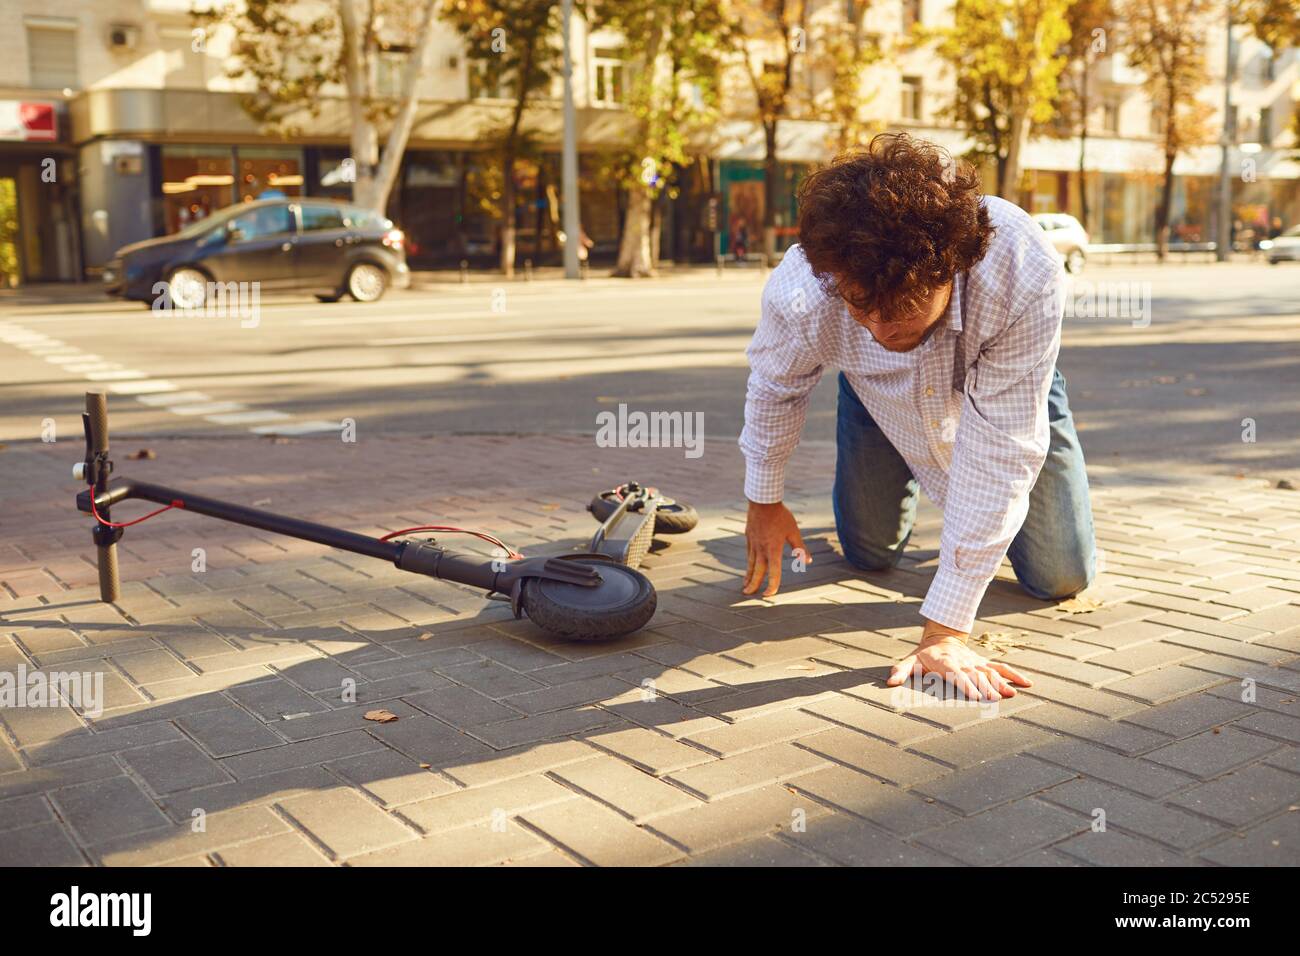 Accident with an electric scooter. A man fell from a scooter on a city street. Stock Photo